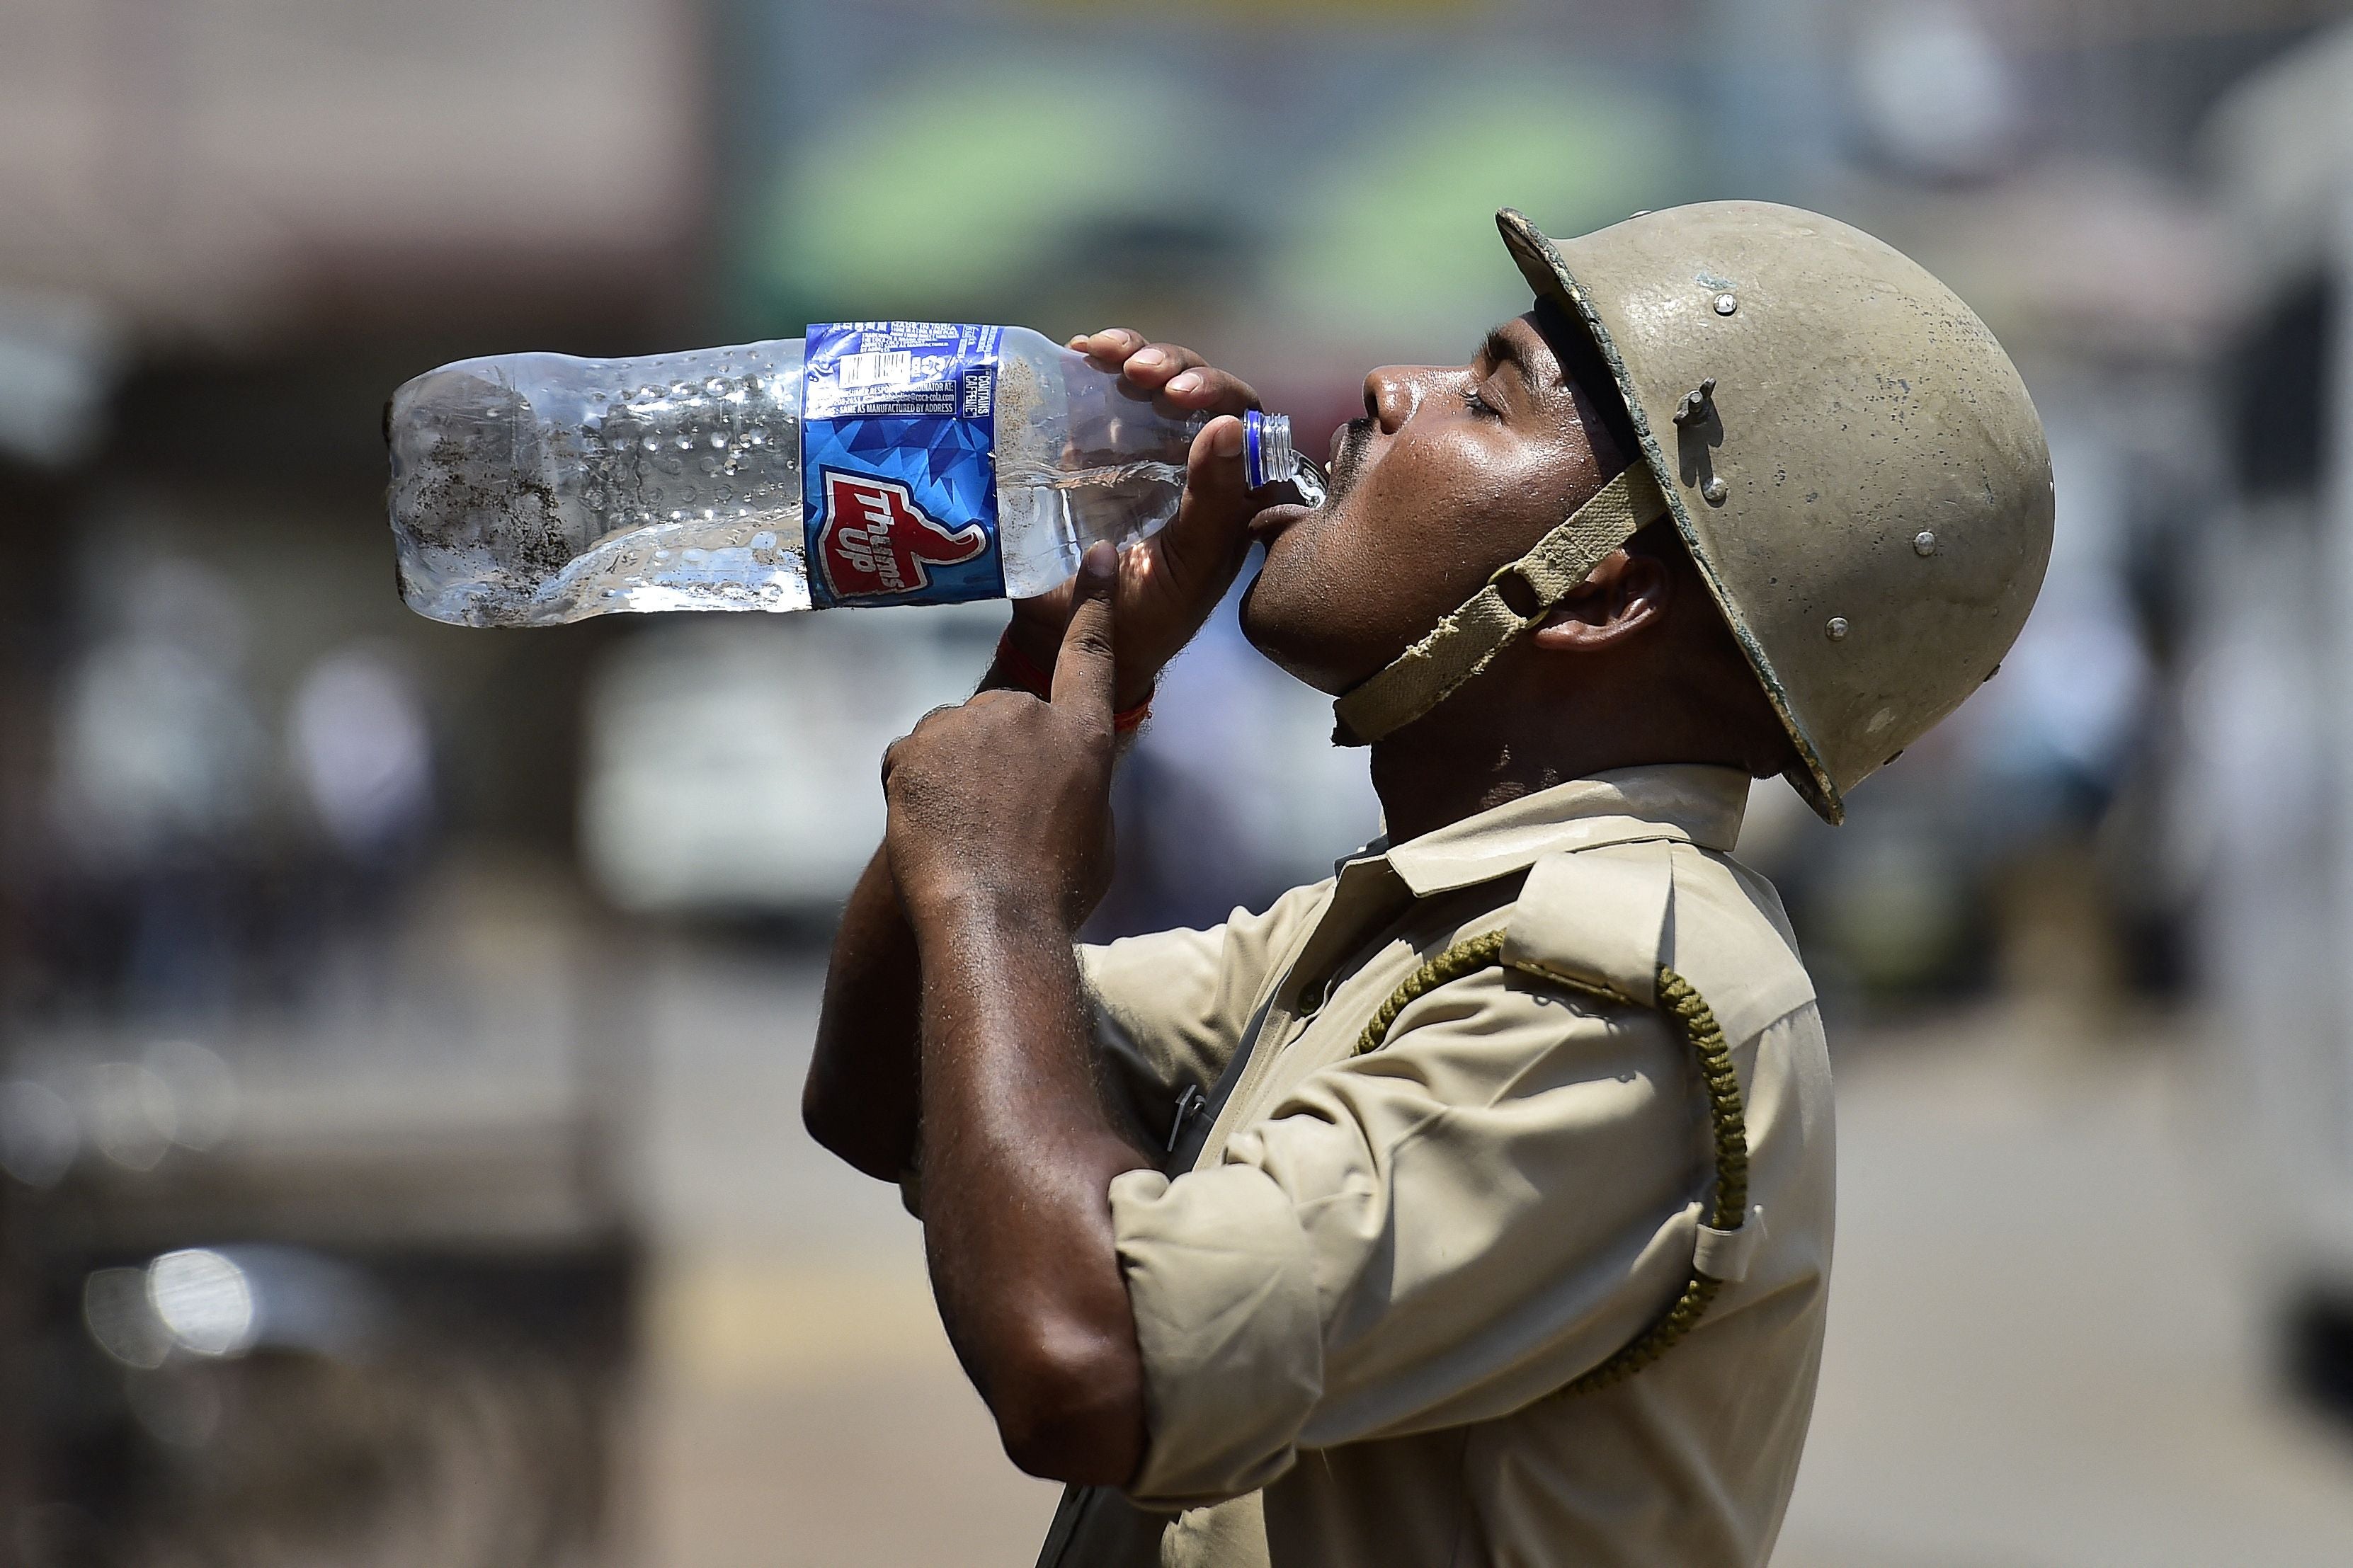 File photo: A policeman drinks water as he stands guard in the Atala area during Friday noon prayer in Allahabad on 17 June